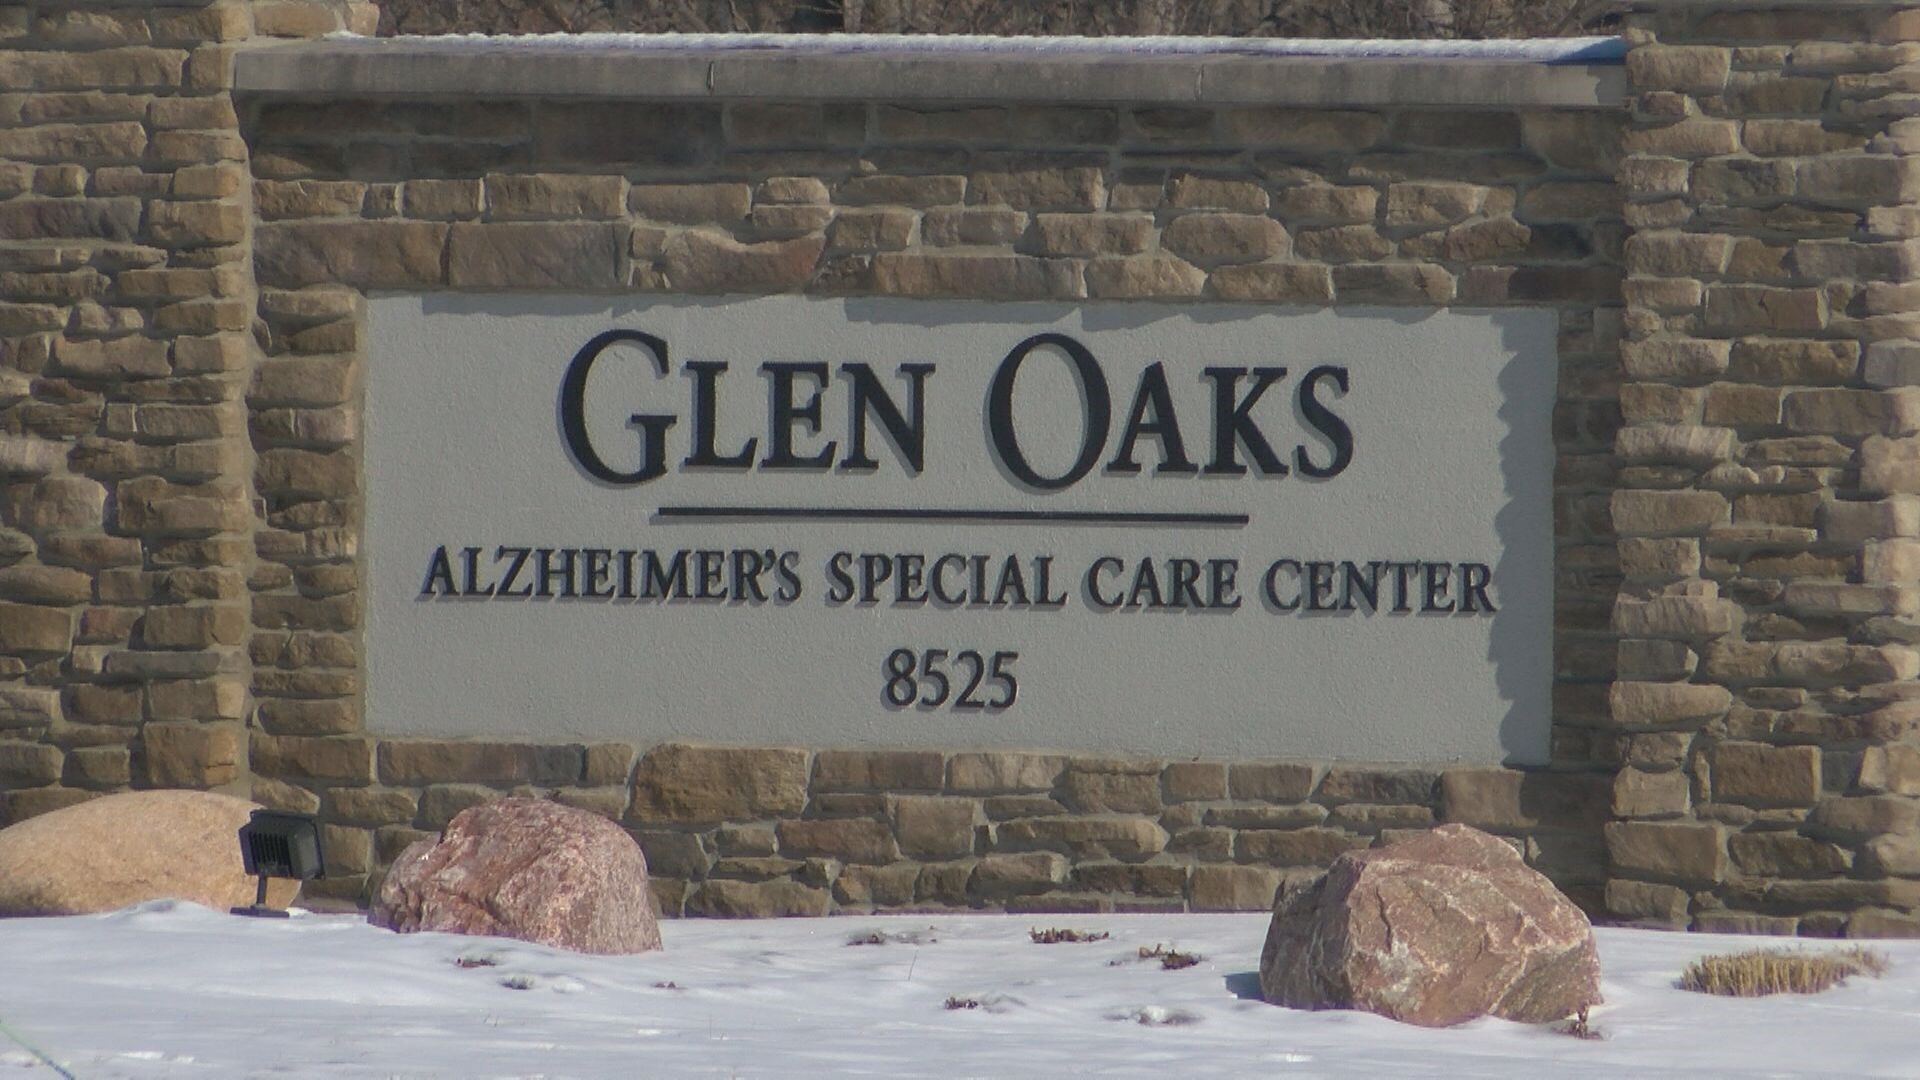 Glen Oaks Alzheimer's Special Care Center is facing a large fine after a woman it pronounced dead was found "gasping for air" at a local funeral home.